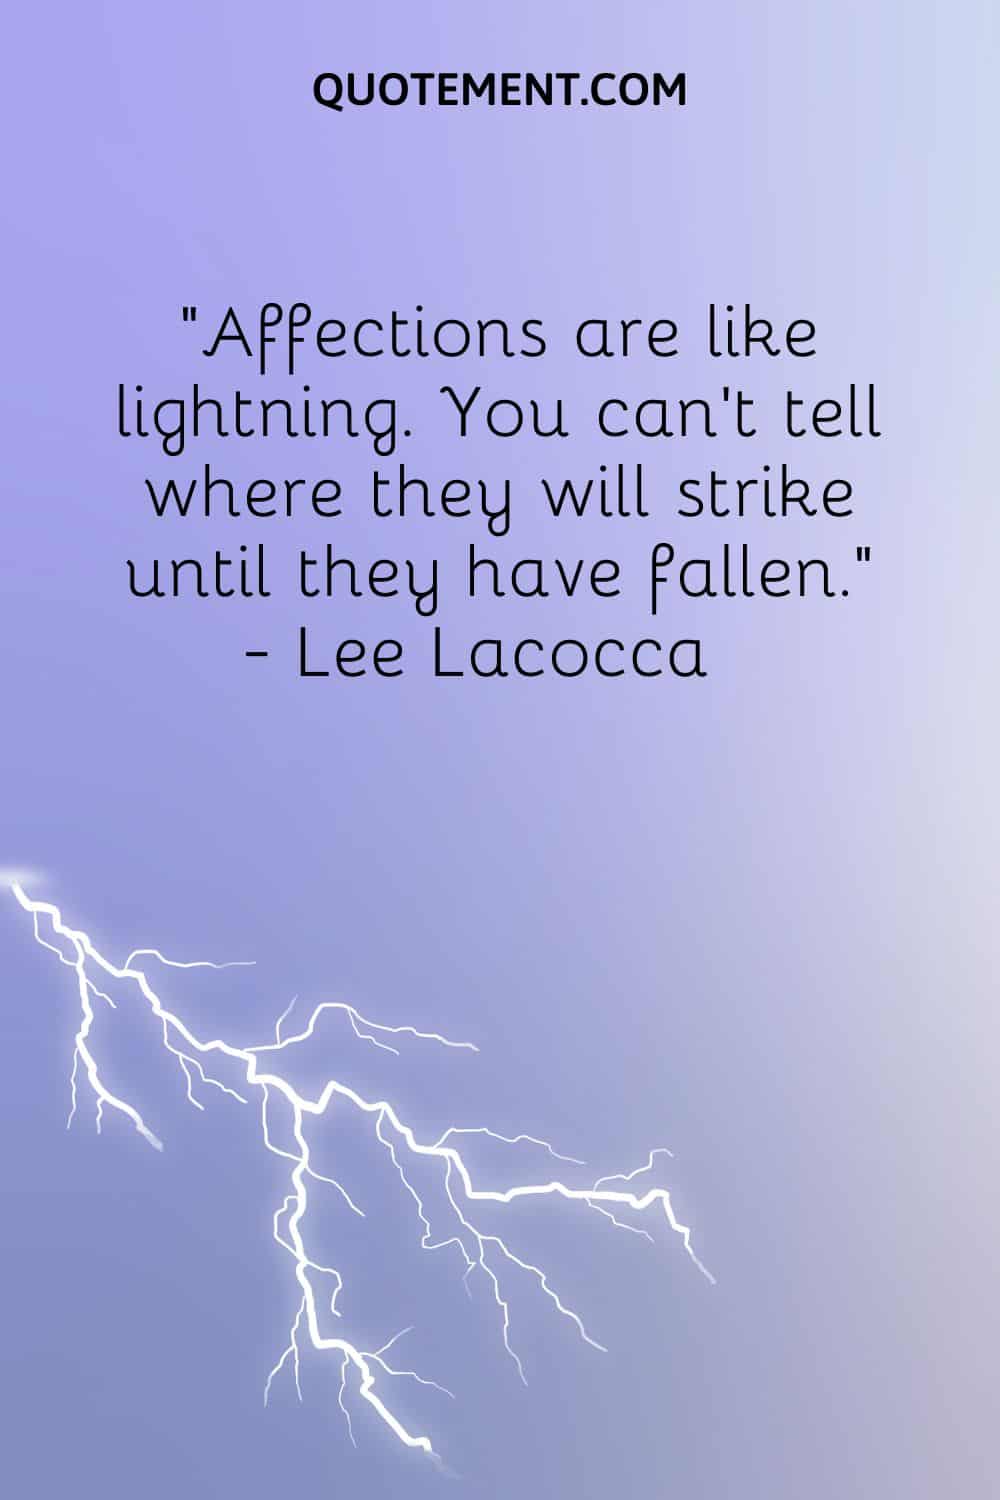 Affections are like lightning